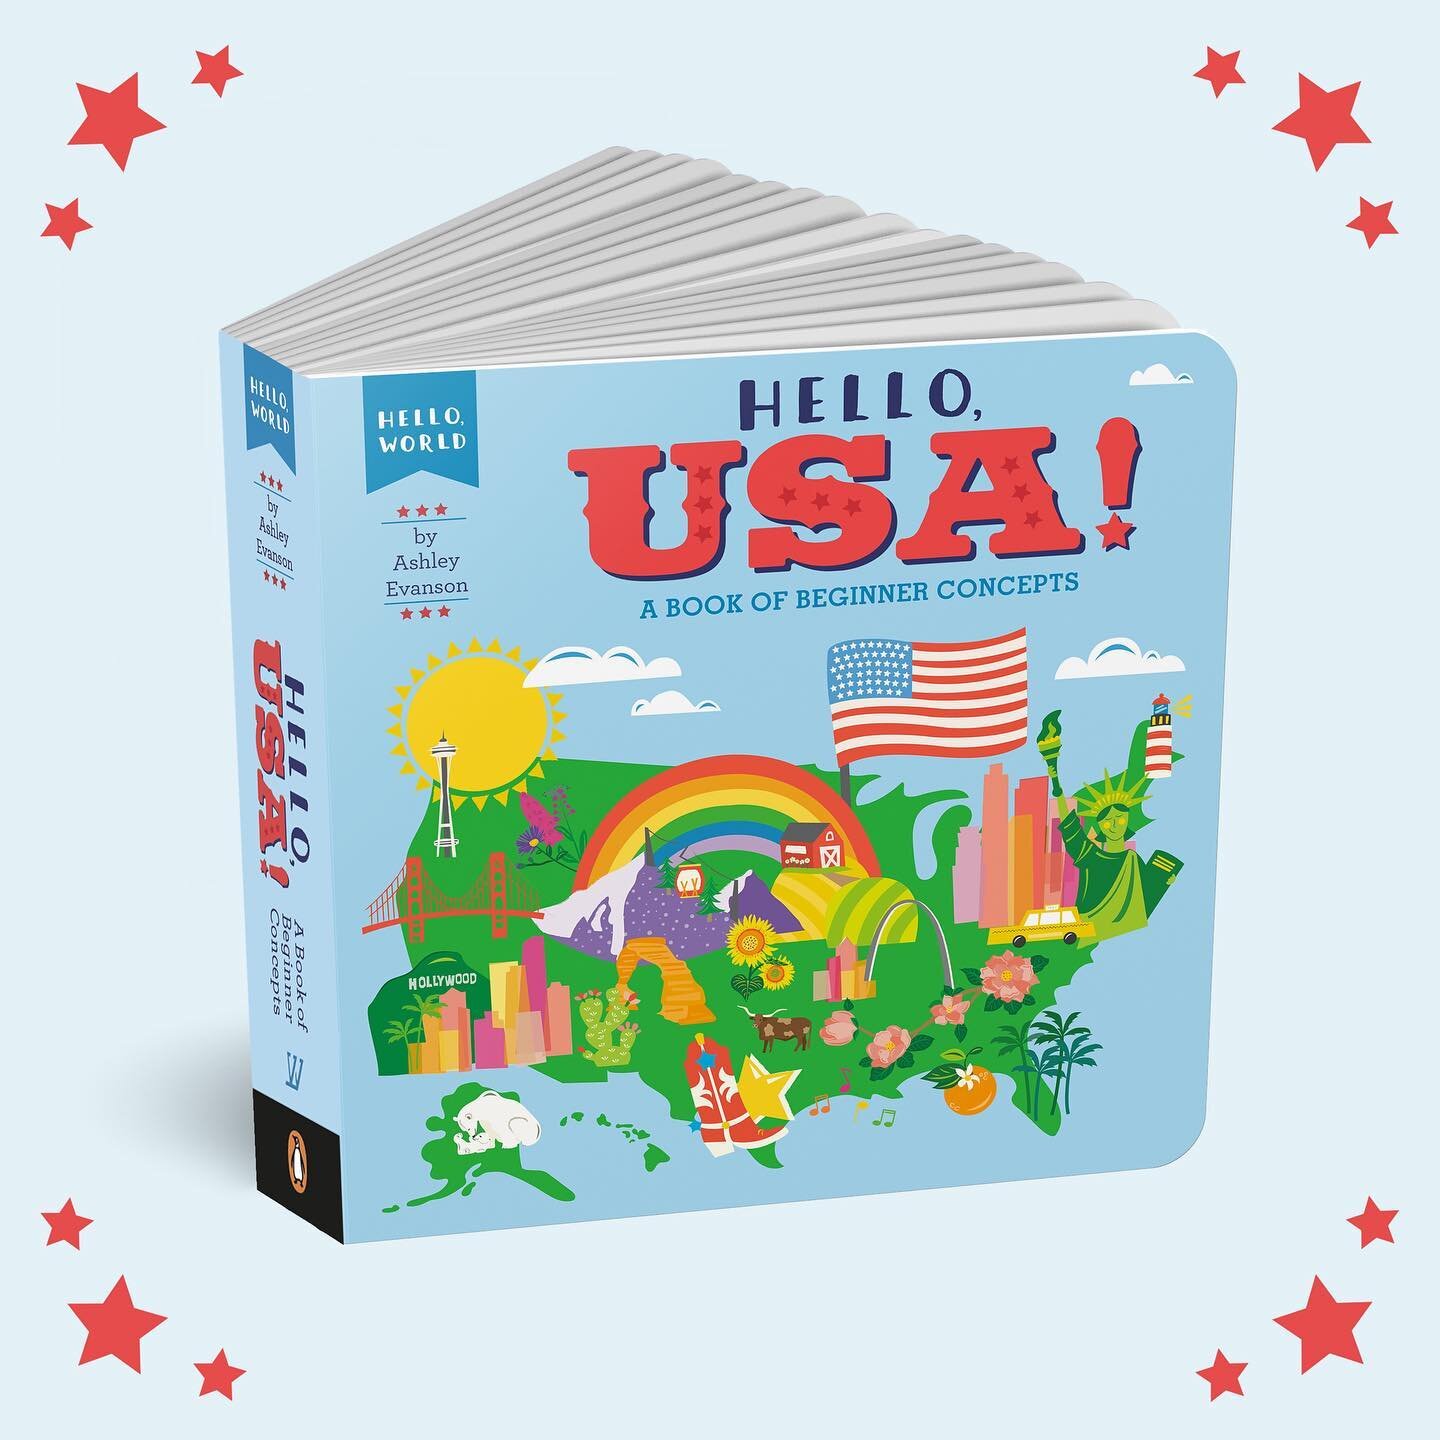 Happy happy book birthday to Hello, USA! by Ashley Evanson @helloworldbooks. Her illustrations for all 50 states are absolutely gorgeous in this fun and educational board book! Had so much fun working with Ashley on this one. It&rsquo;s so fitting fo